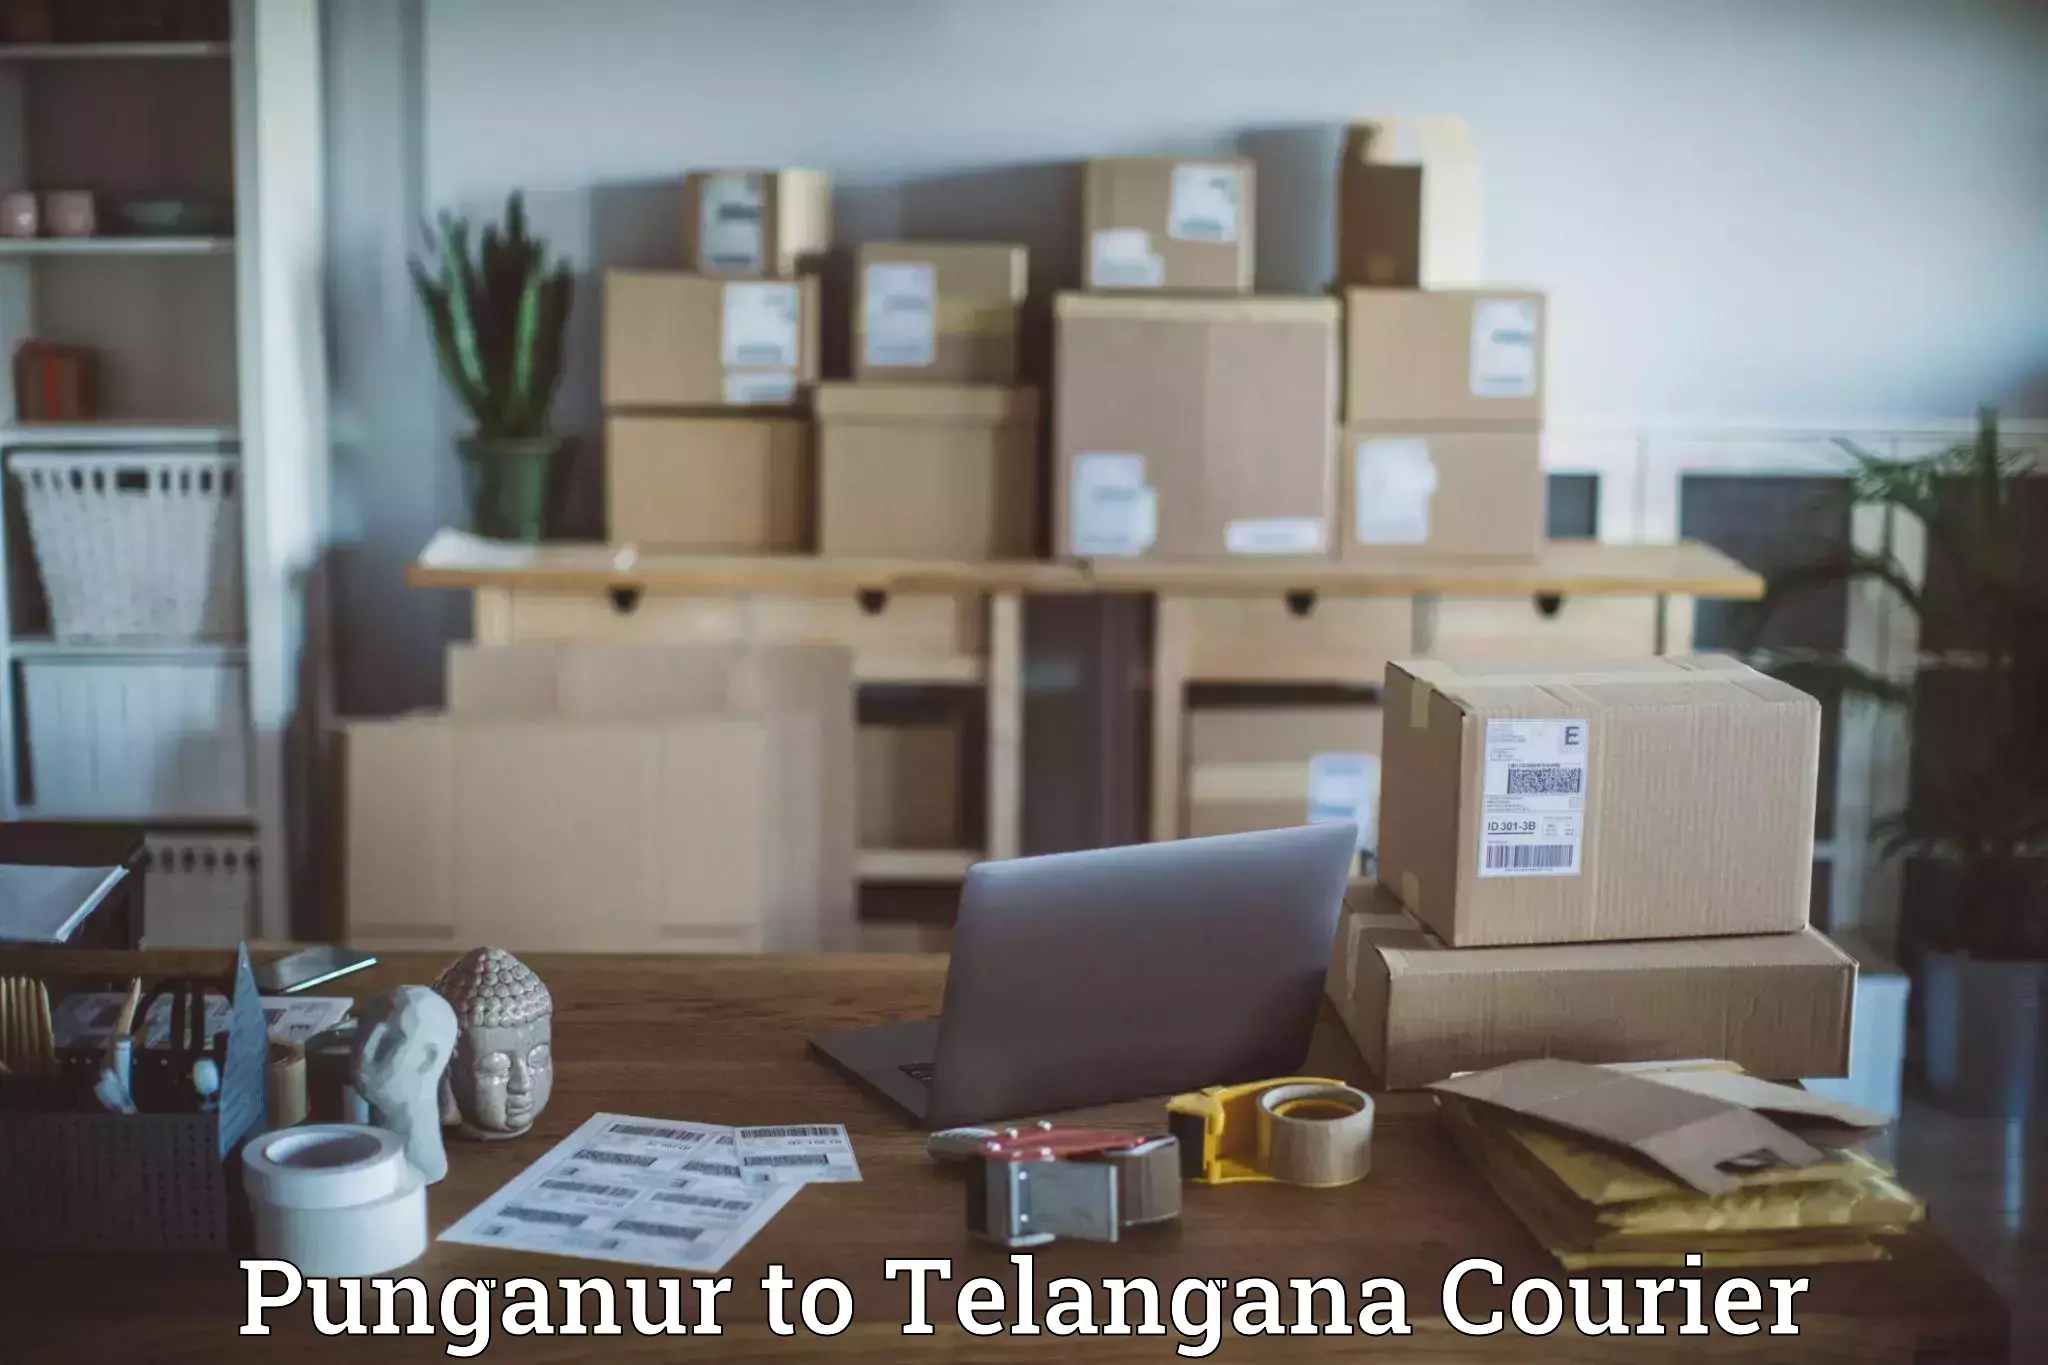 Courier service booking in Punganur to Pregnapur